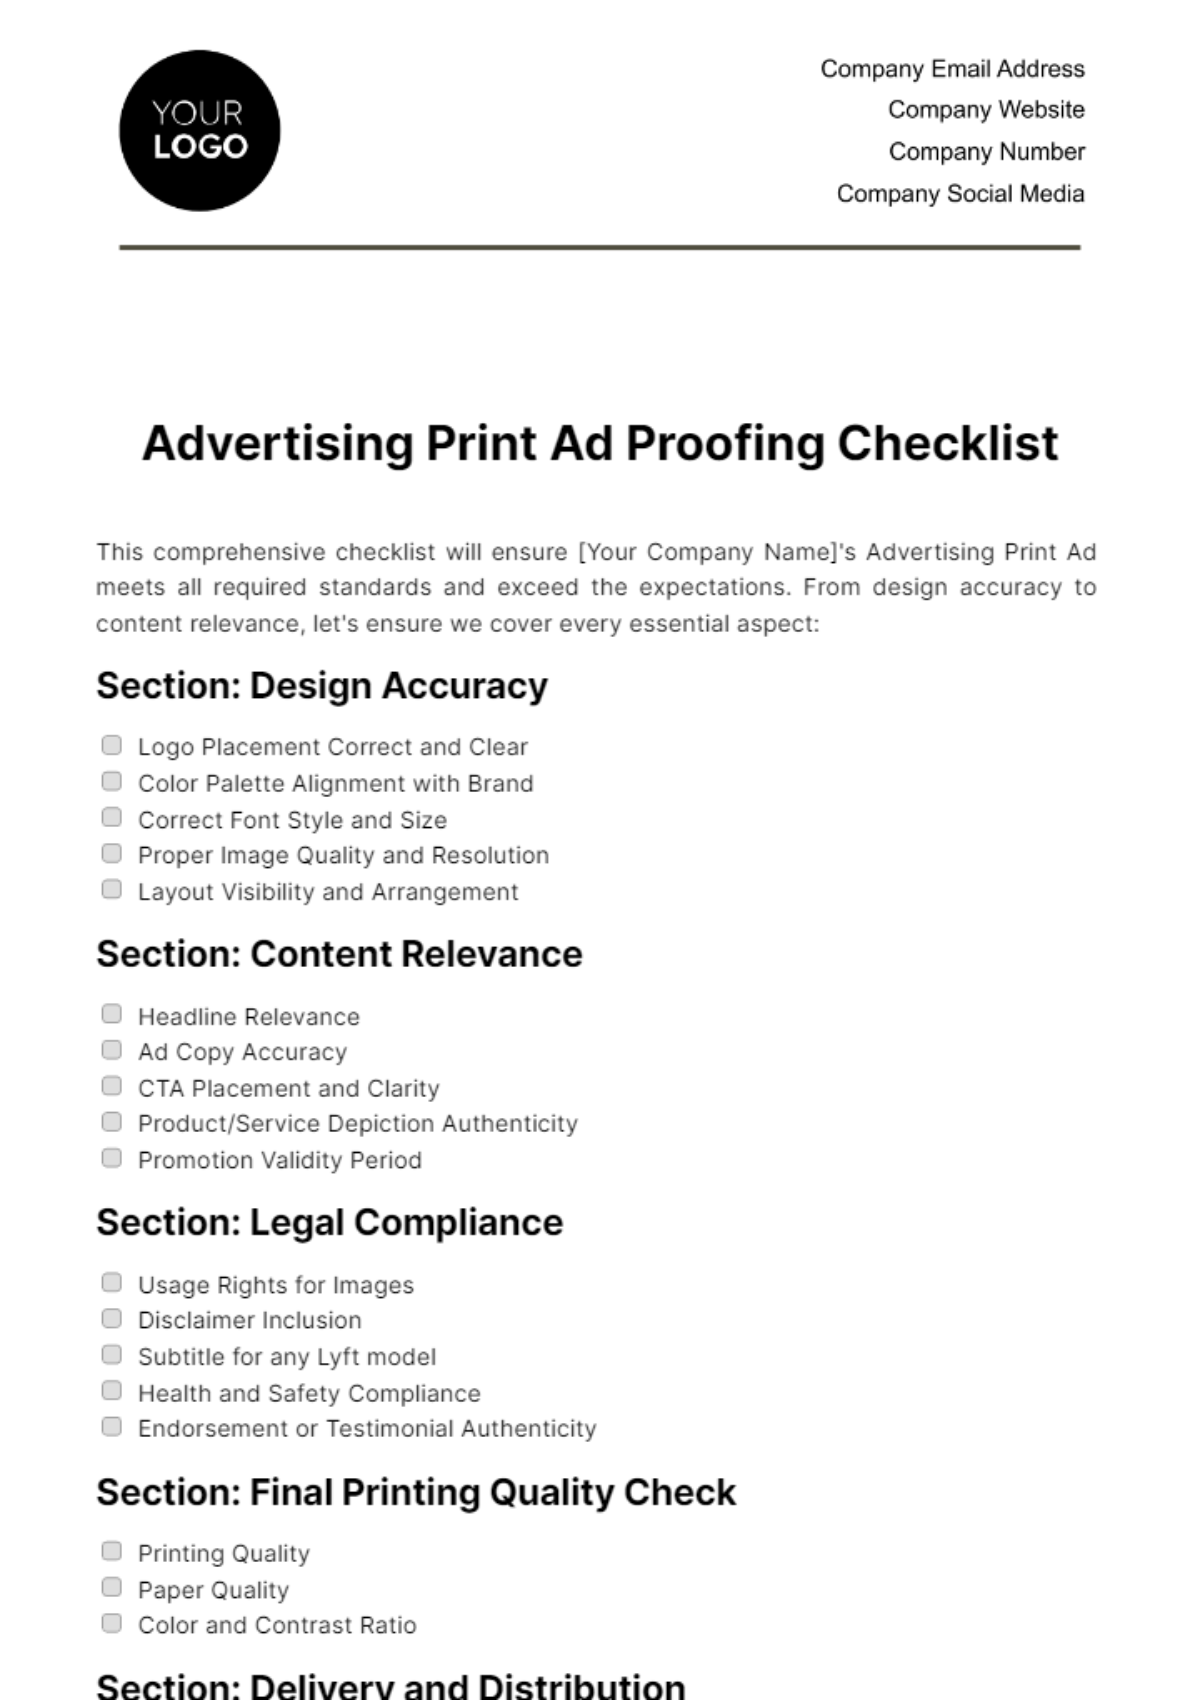 Free Advertising Print Ad Proofing Checklist Template